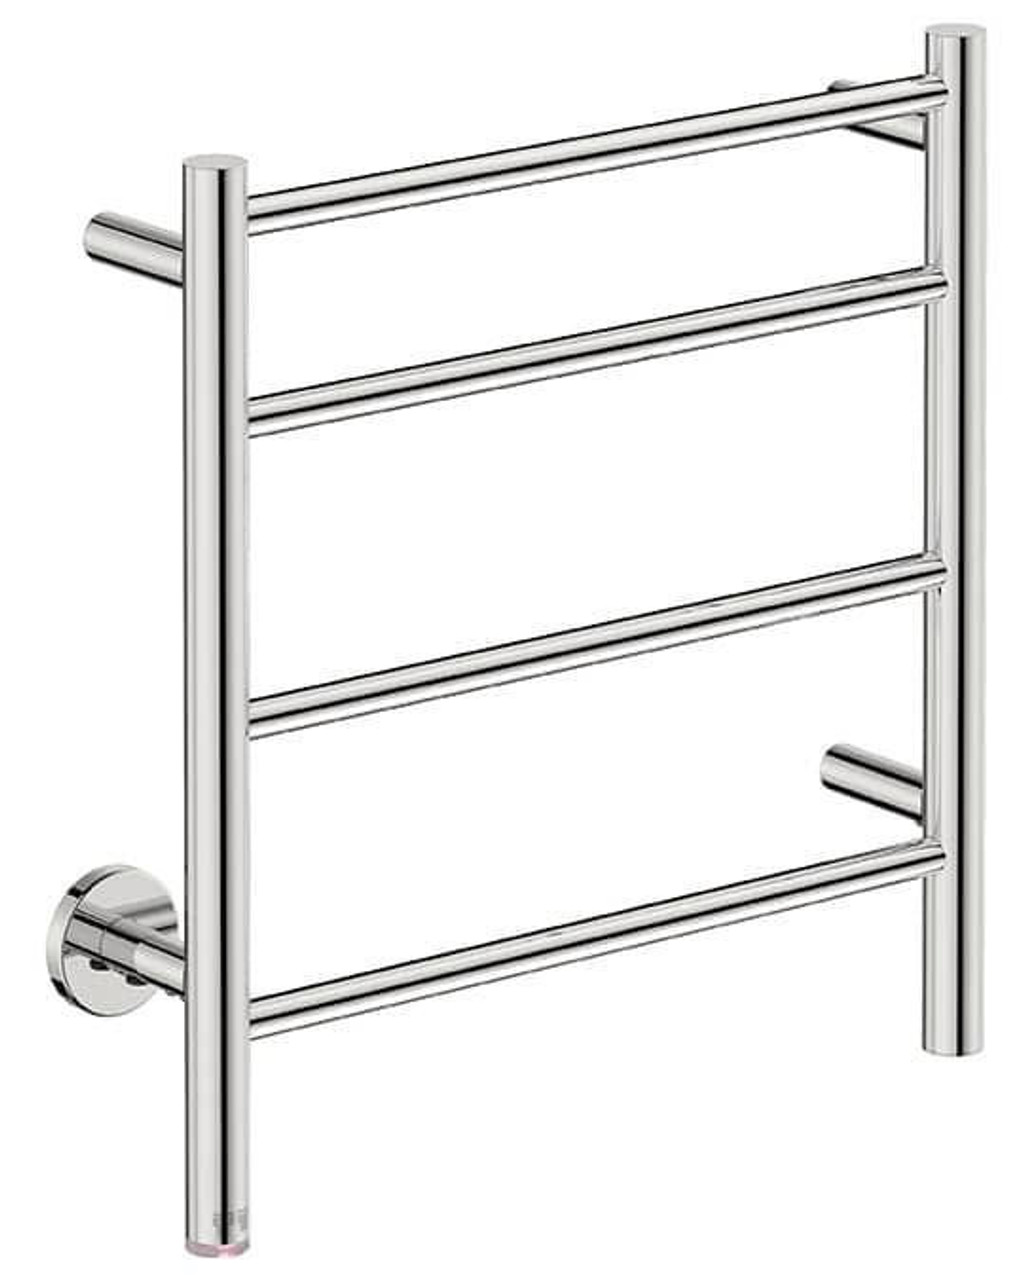 357016 Bathroom Butler Natural 4 Bar 500mm Straight Heated Towel Rail with PTSelect Switch Polished Stainless Steel NAT04221-PTS-POLS